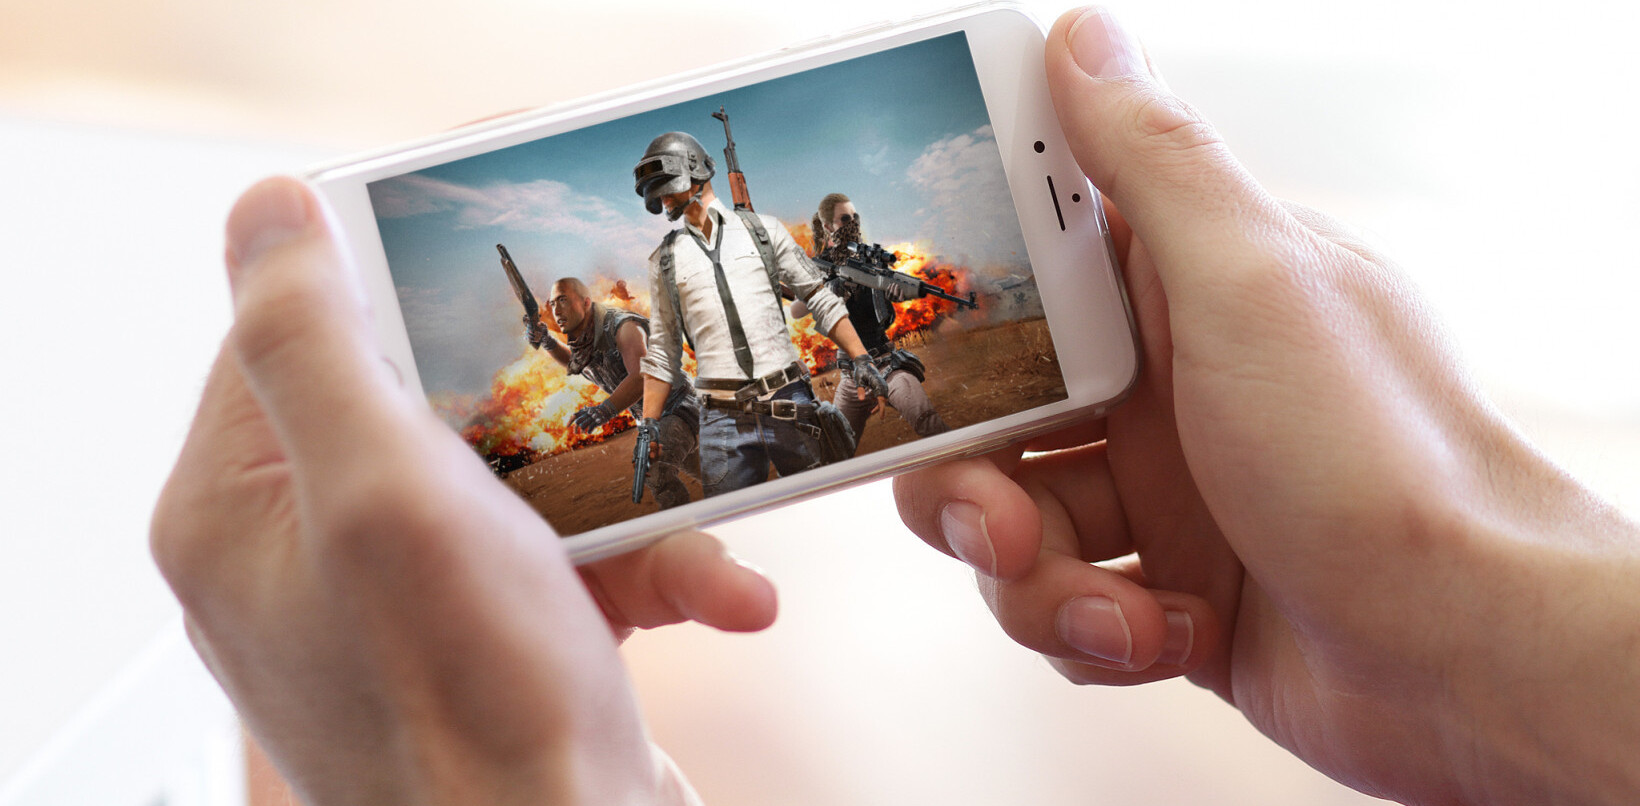 PUBG’s owner is trying to have the game unbanned in India by distancing itself from Tencent